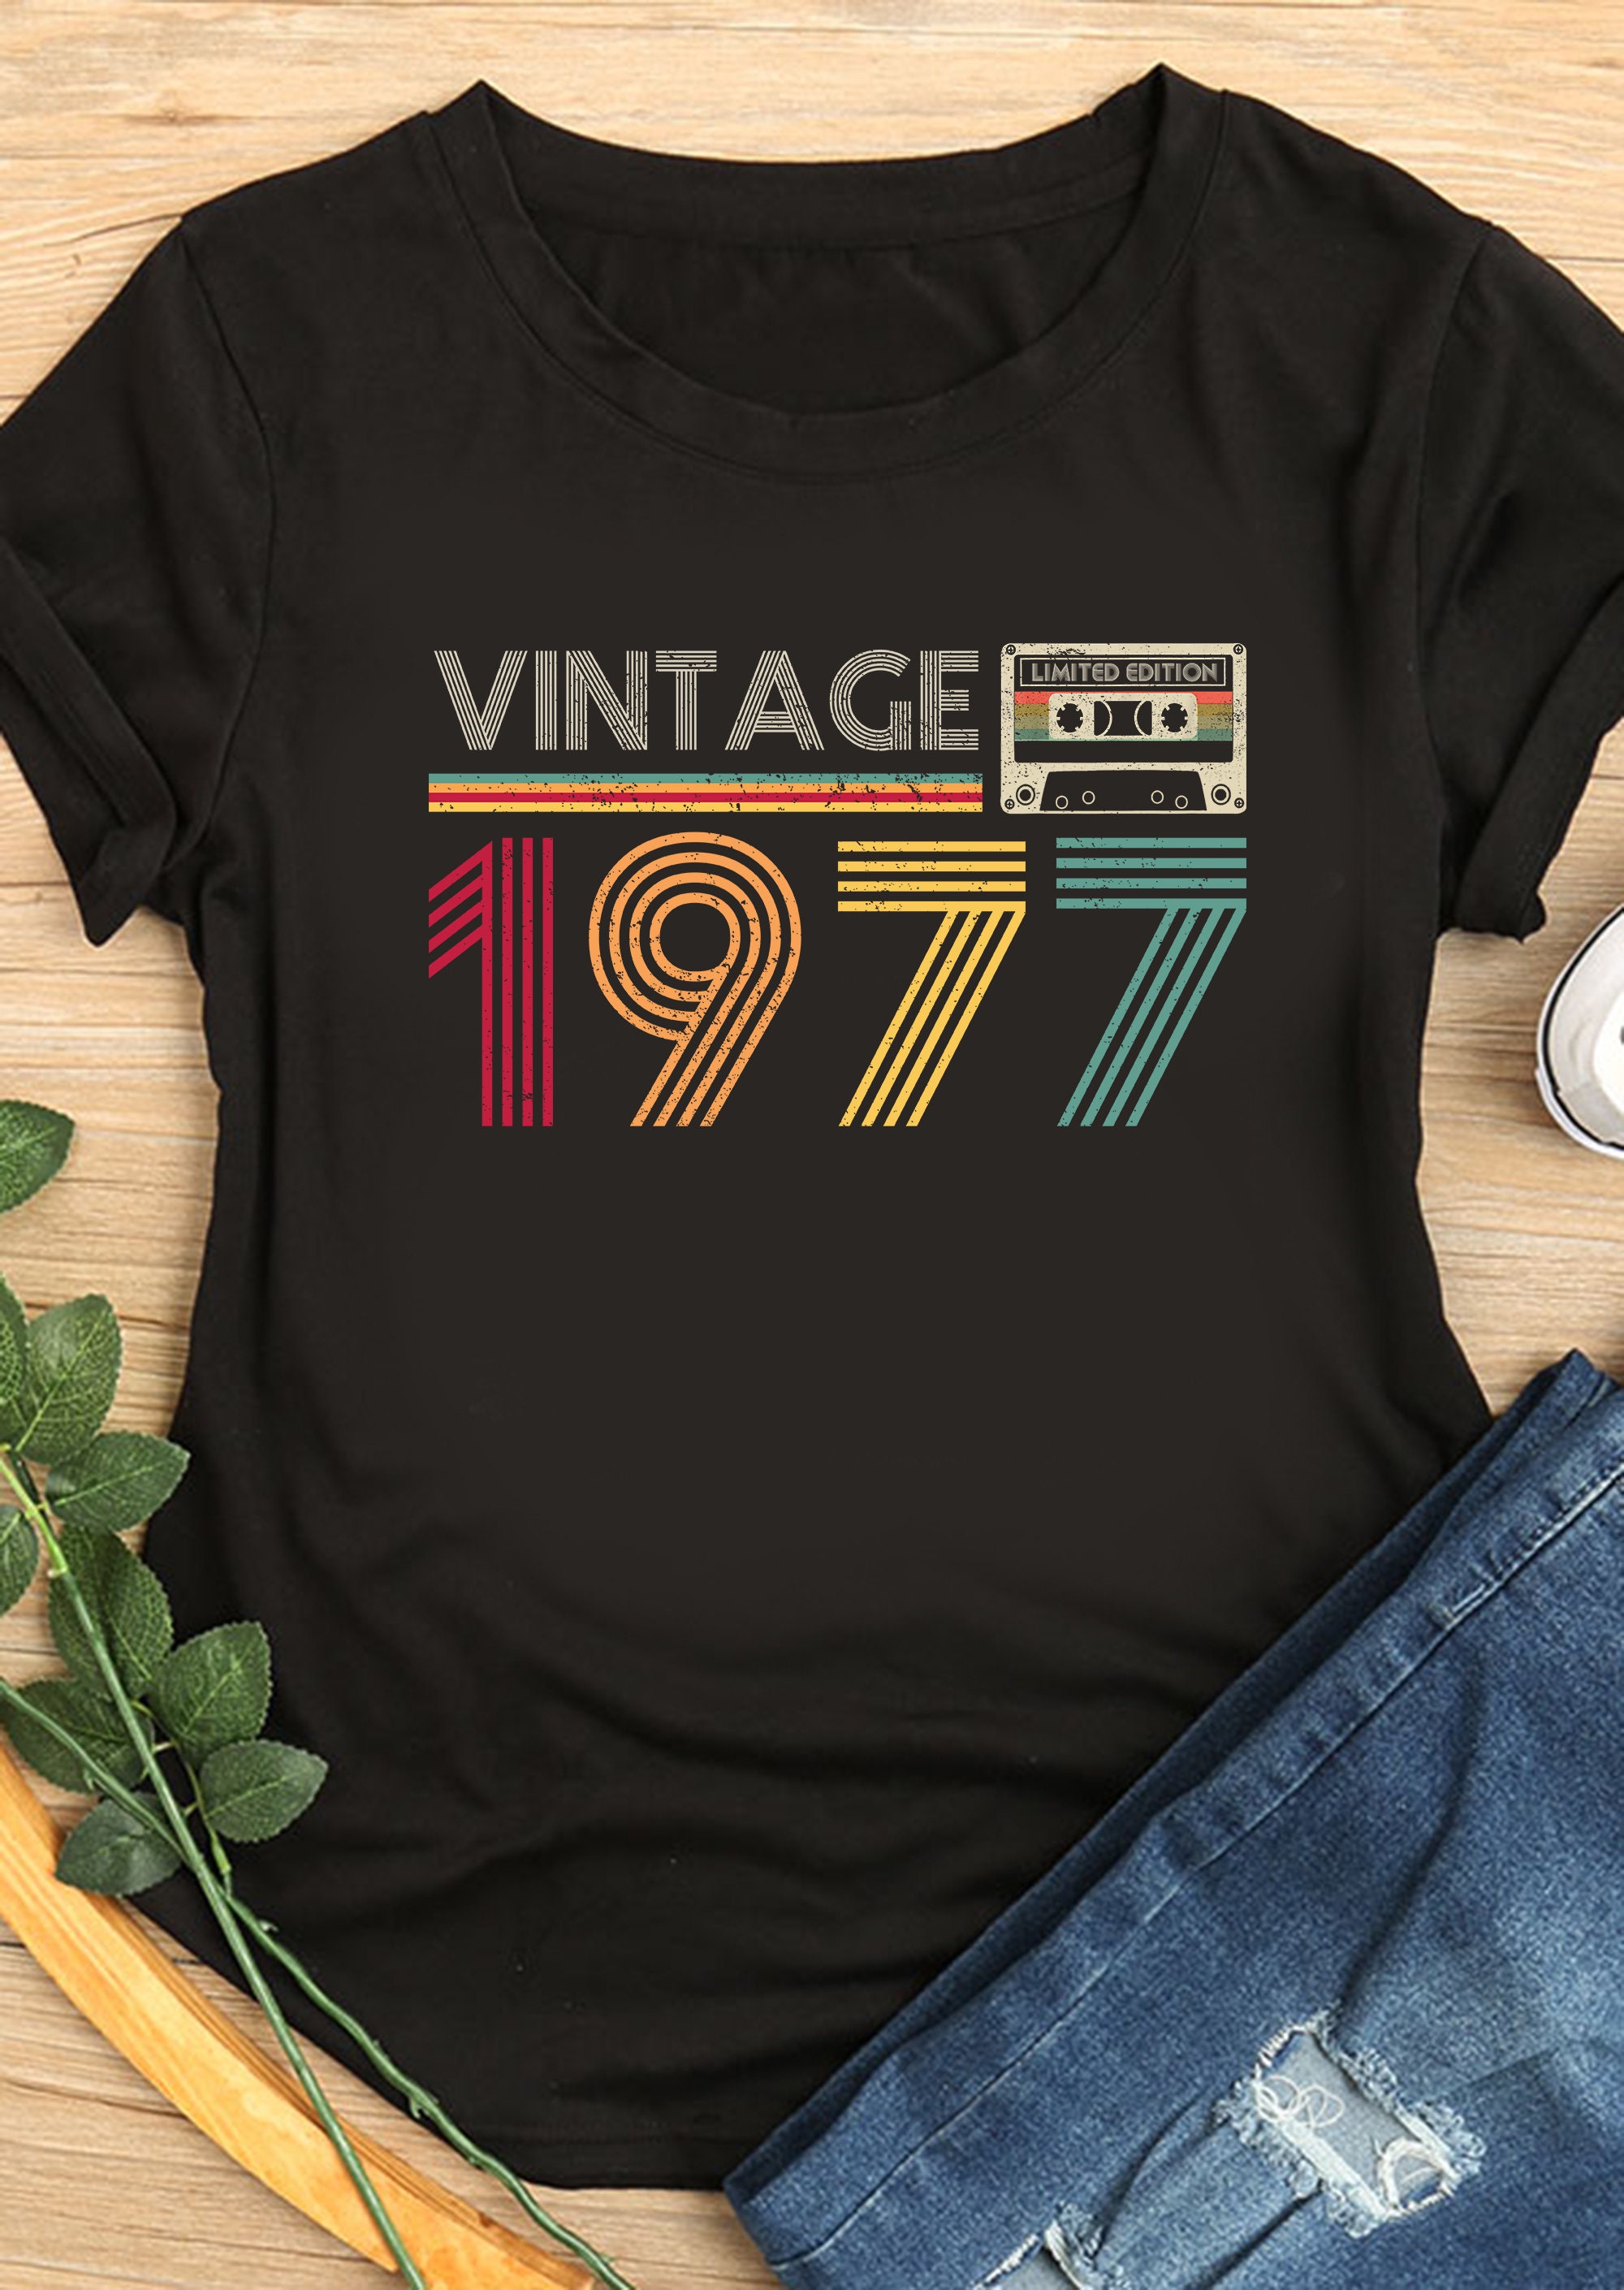 Father's Day Gift for men. Classic Car 1977 t-shirt 44th Birthday Shirt Born In 1977 Vintage 1977 44th Birthday Gift 1977 birthday